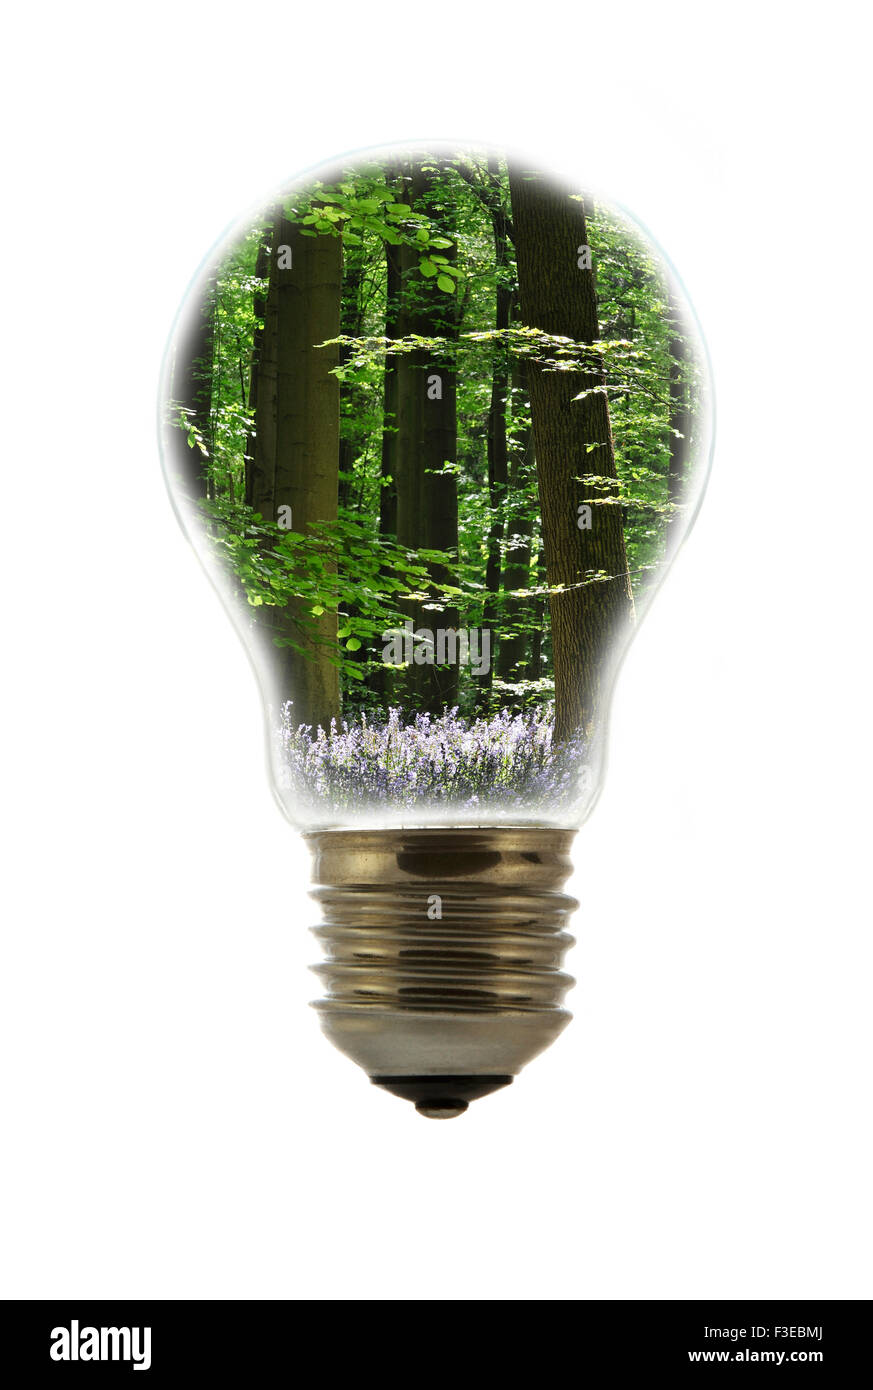 Conceptual image showing trees in spring forest inside incandescent lamp / bulb against white background Stock Photo